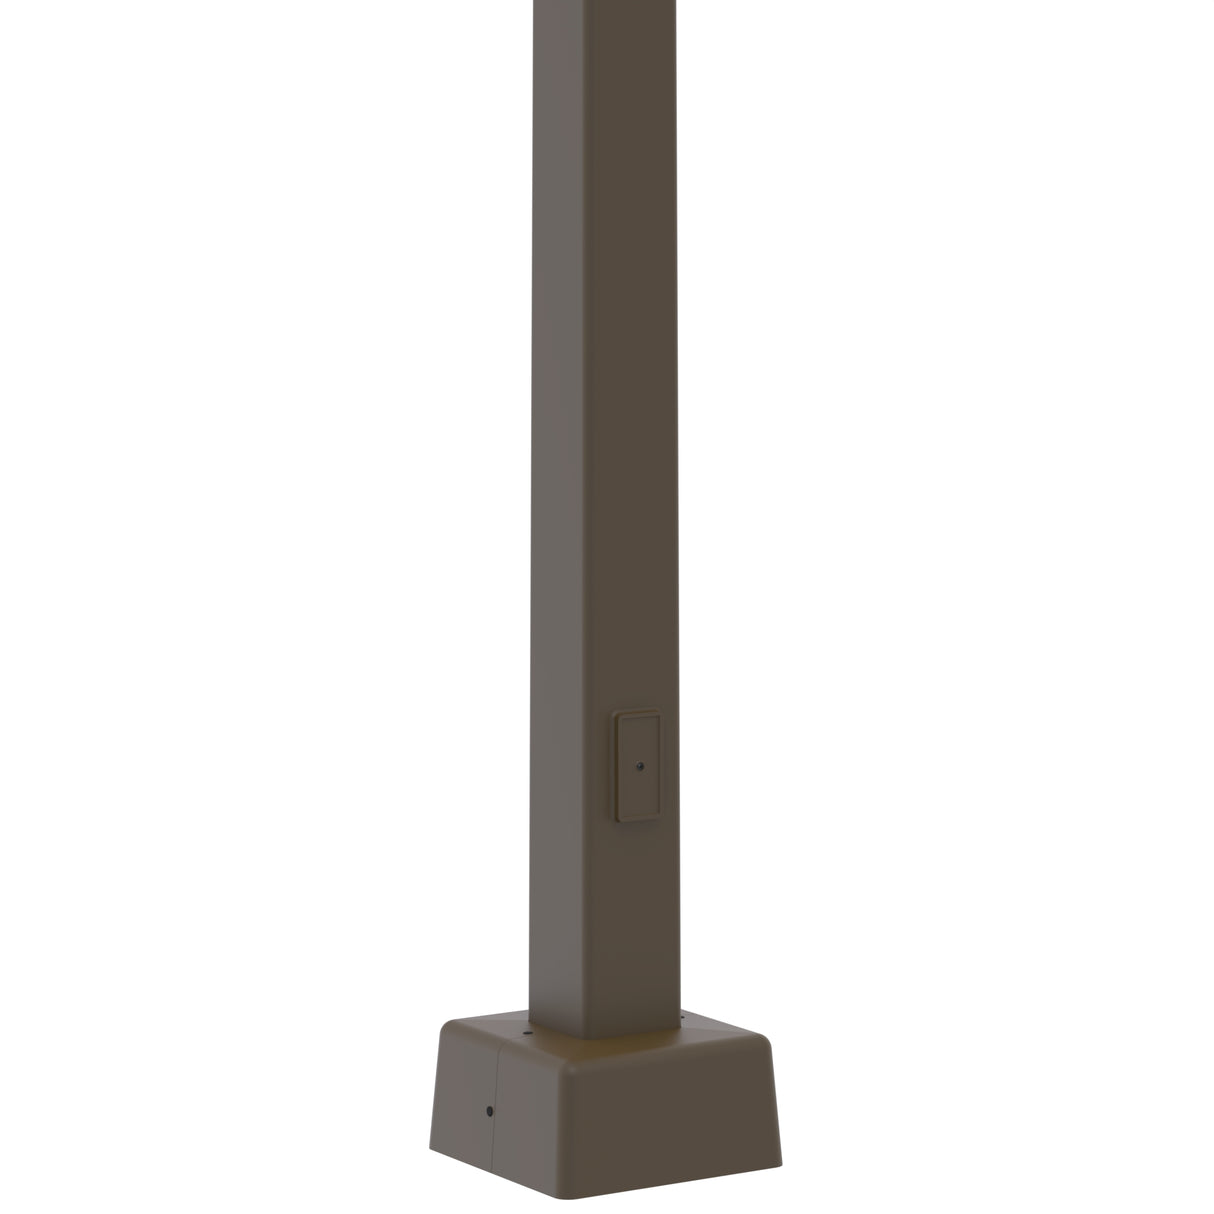 20' Tall x 5.5" Base OD x 3.3" Top OD x 7ga Thick, Square Tapered Steel, Anchor Base Light Pole